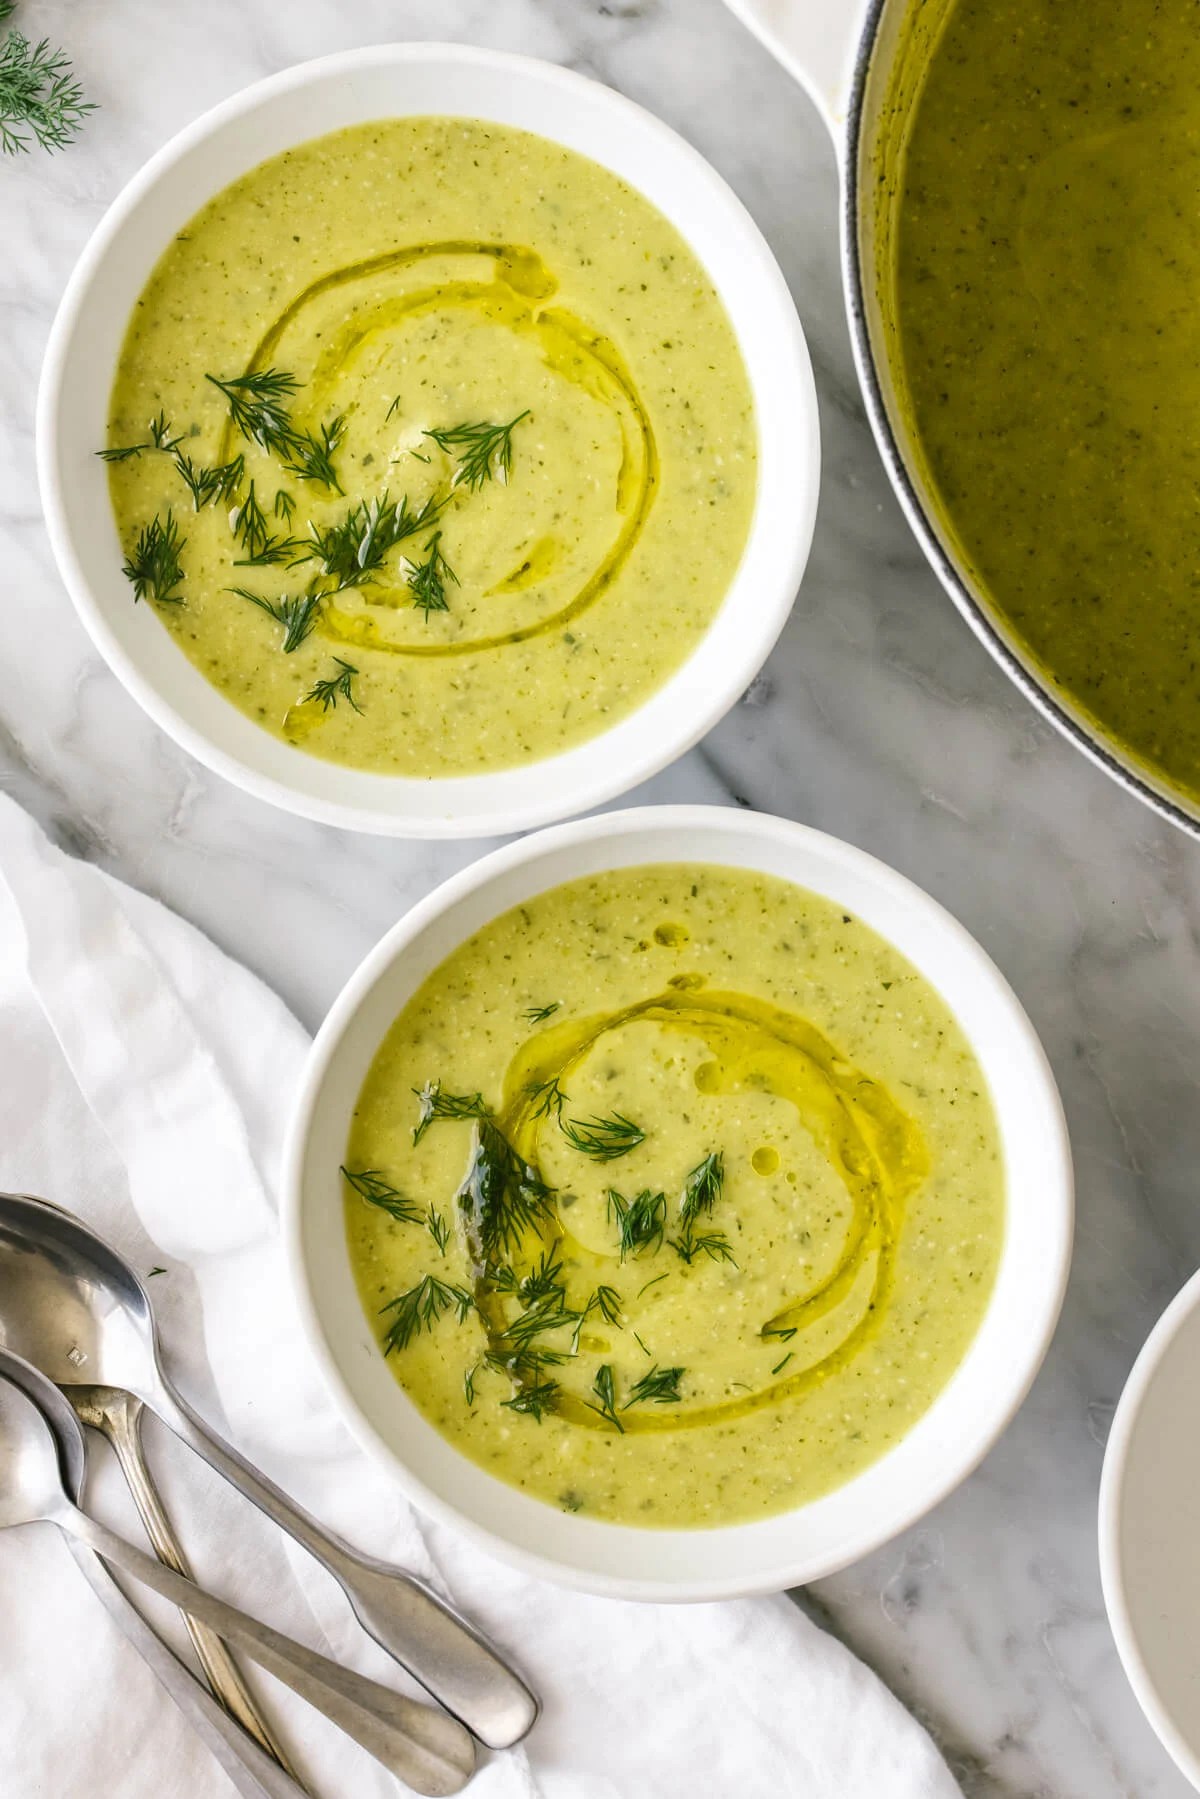 Zucchini soup in two white bowls on a table next to spoons.